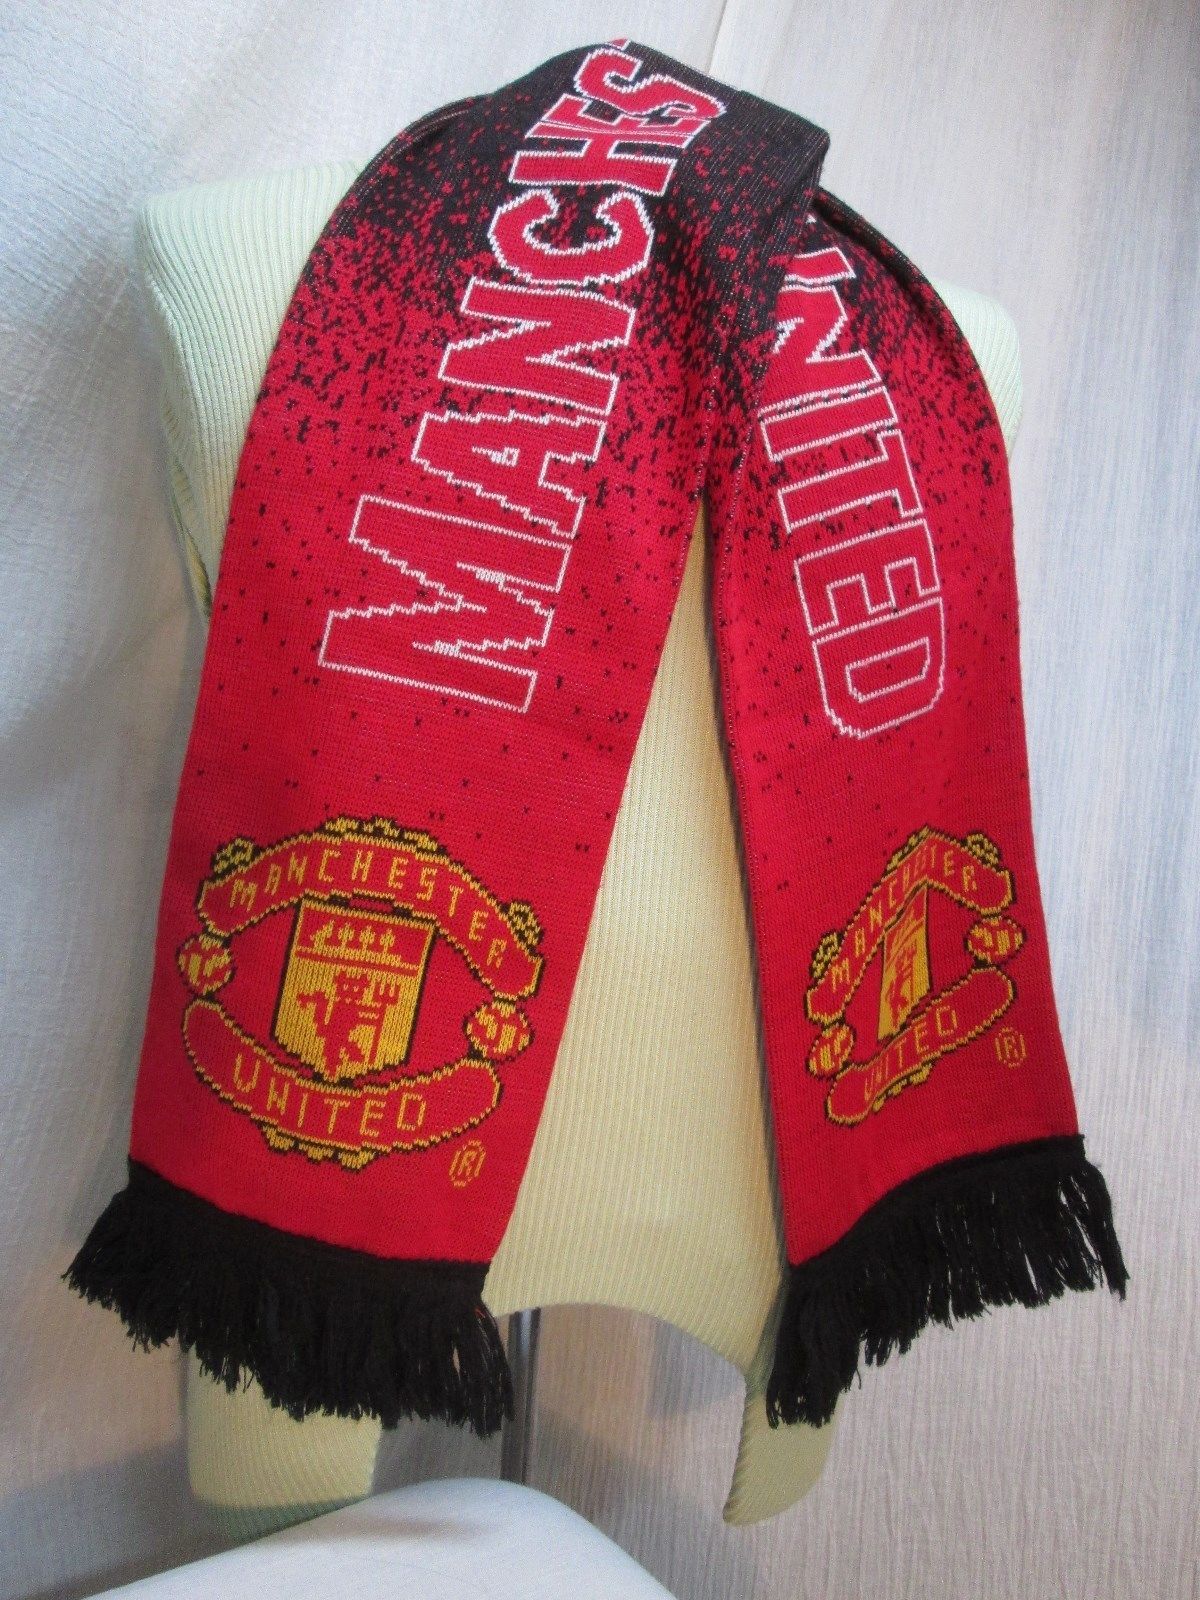 M175c MANCHESTER UNITED SCARF OFFICIAL LICENSED ,100% ACRYLIC 57" X 7" SOCCER - $33.66